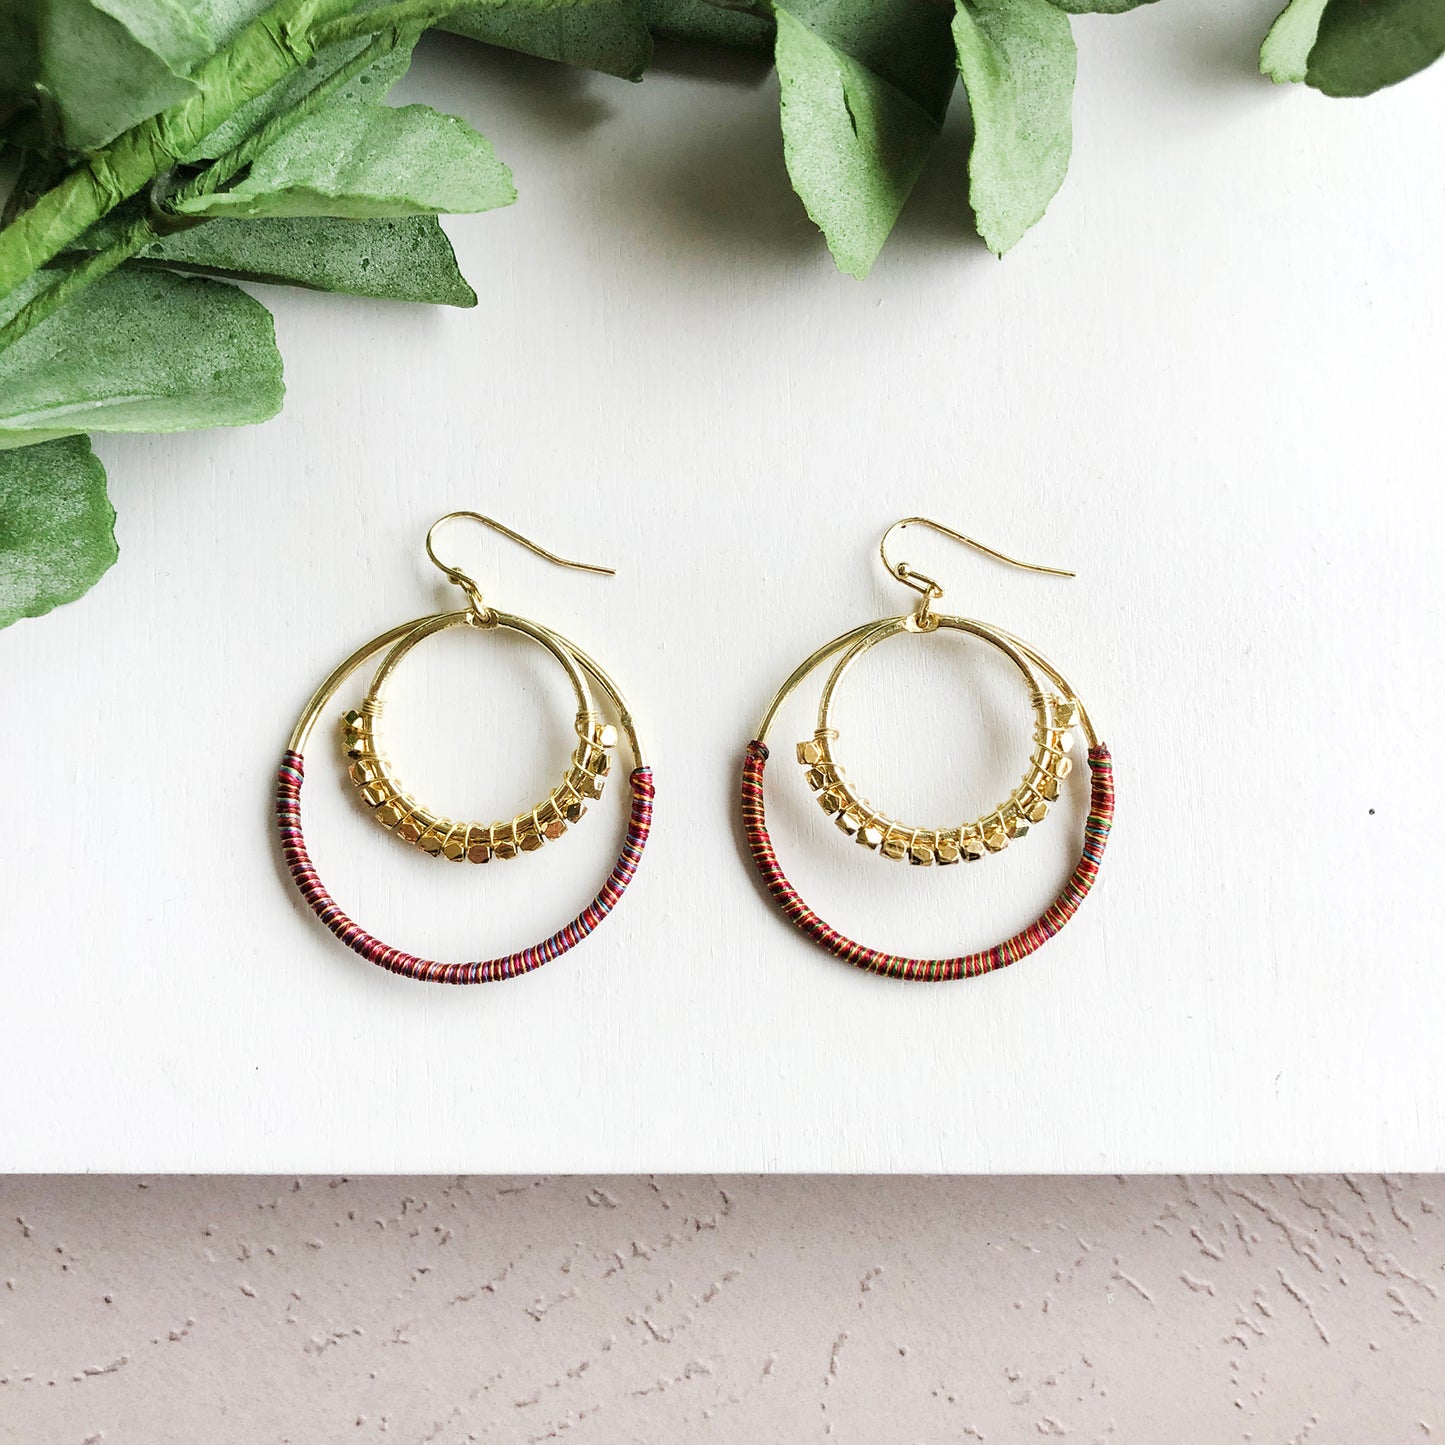 A smaller hoop embellished with faceted metallic beads layers on top of a larger rainbow thread-wrapped hoop to form a pair of earrings.